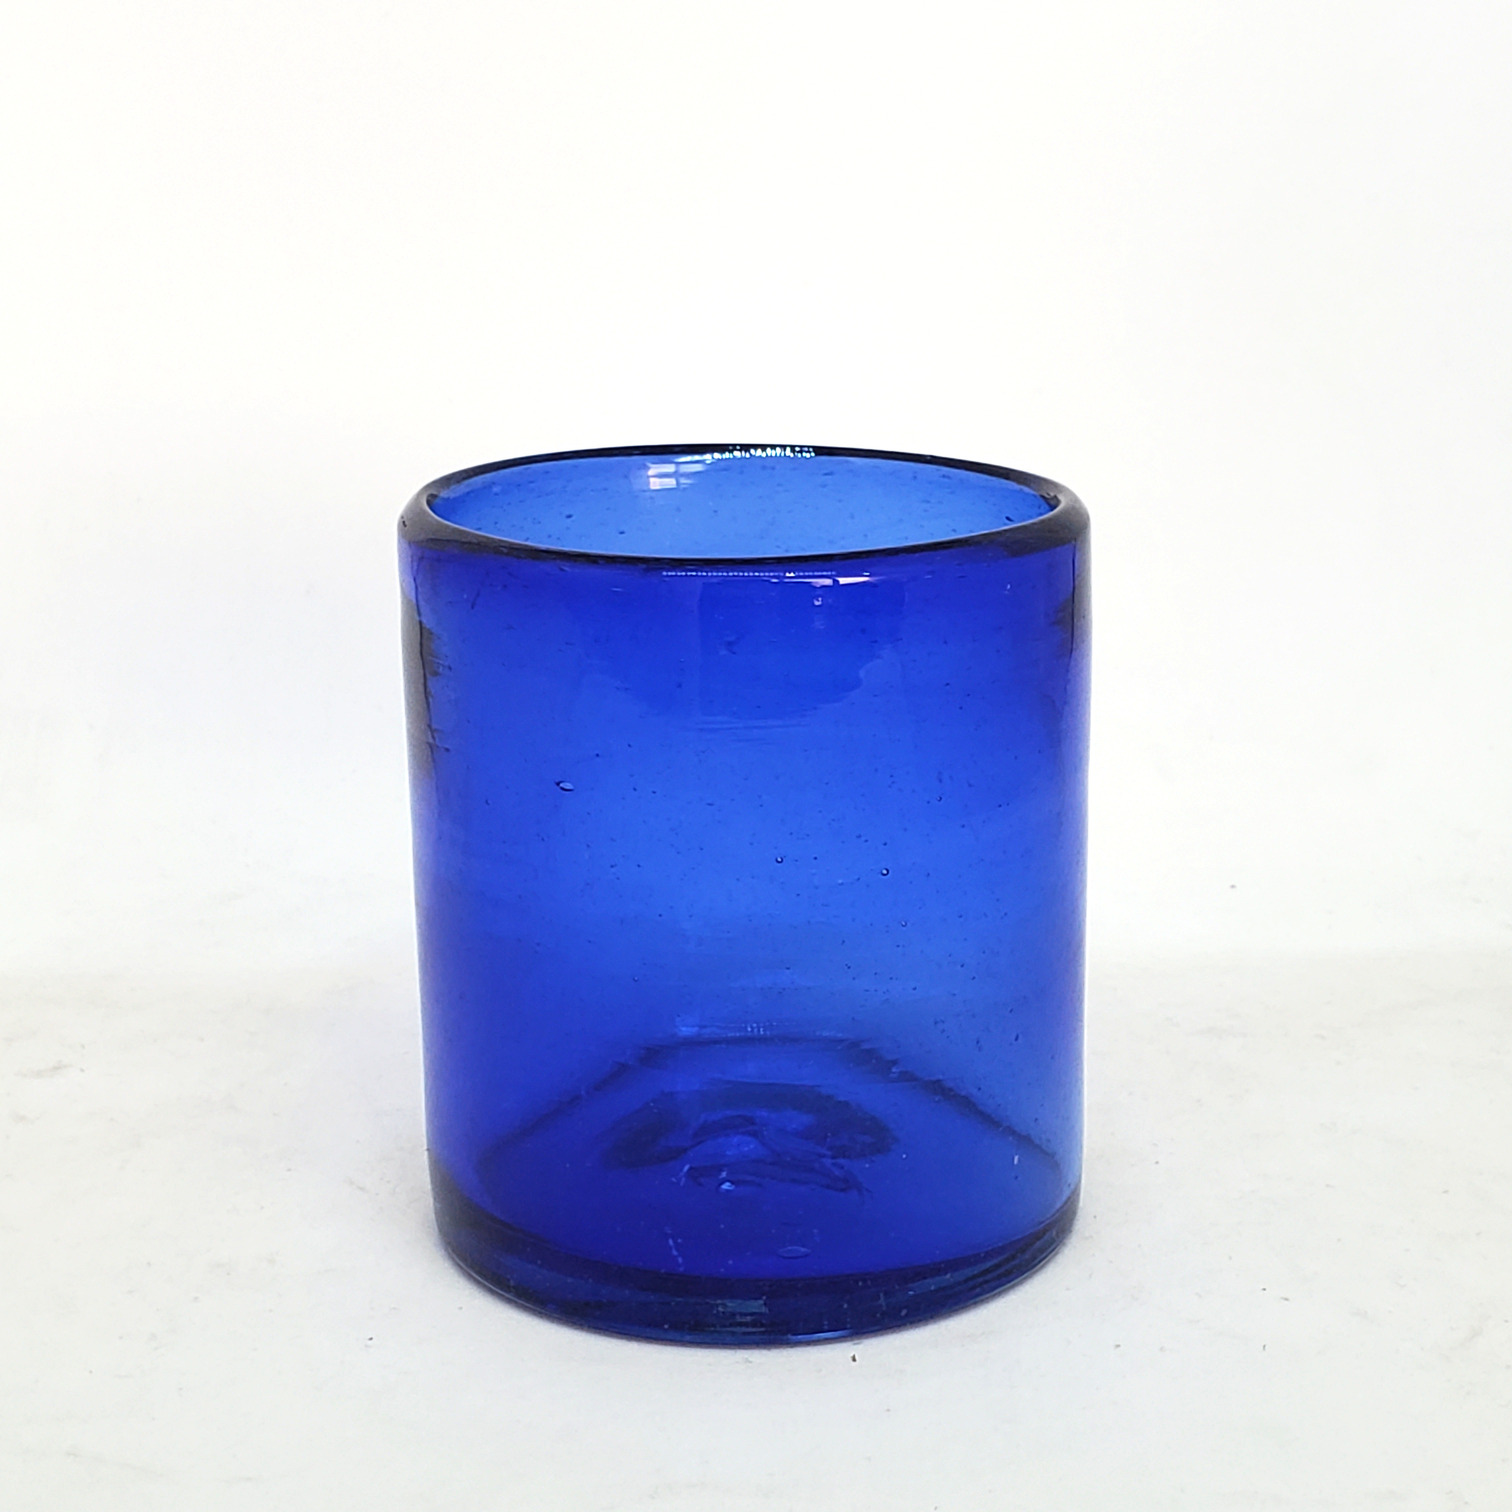 Wholesale MEXICAN GLASSWARE / Solid Cobalt Blue 9 oz Short Tumblers  / Enhance your favorite drink with these colorful handcrafted glasses.